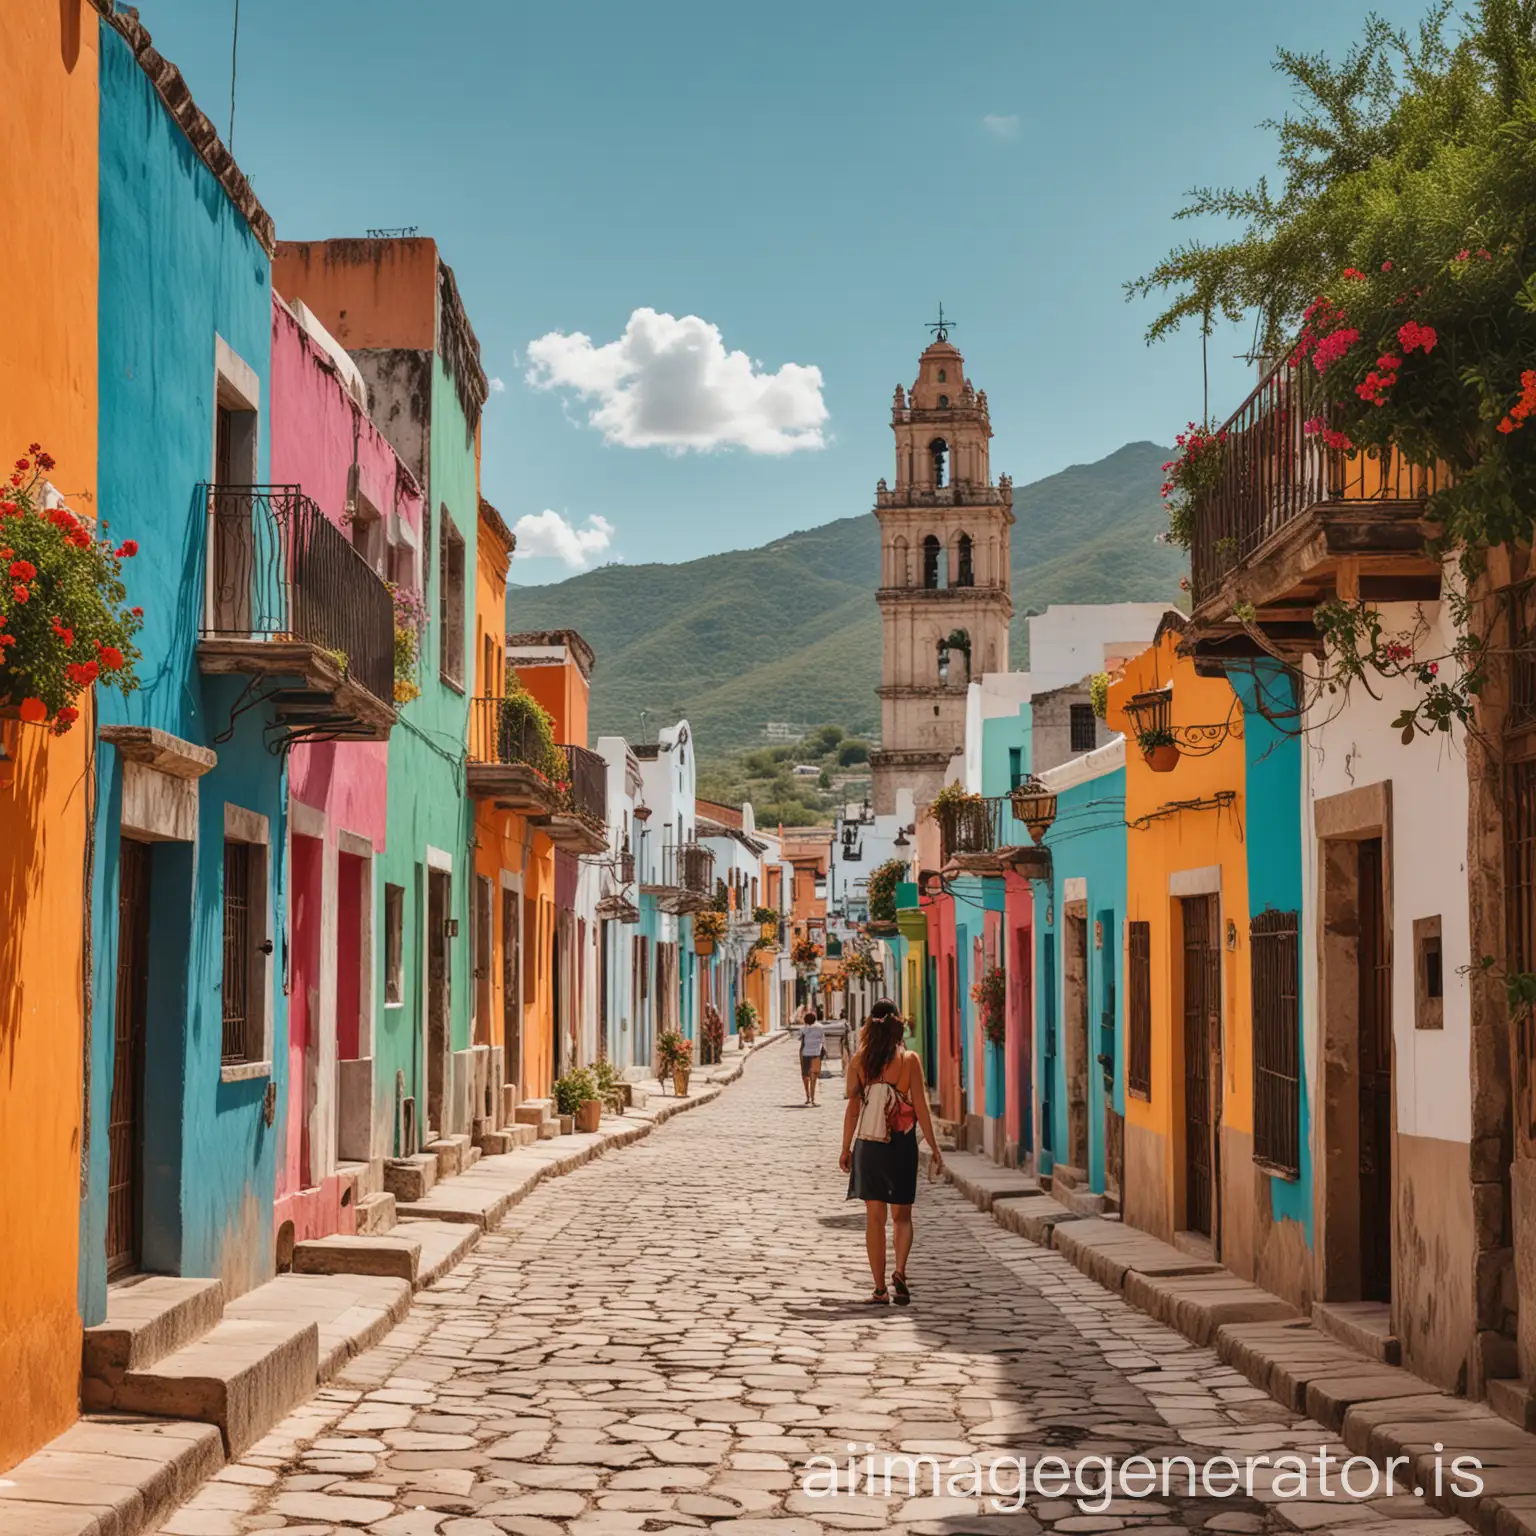 image for an infographic on the least crowded and most afforable towns to visit in mexico include bright colors and imply relaxation activities